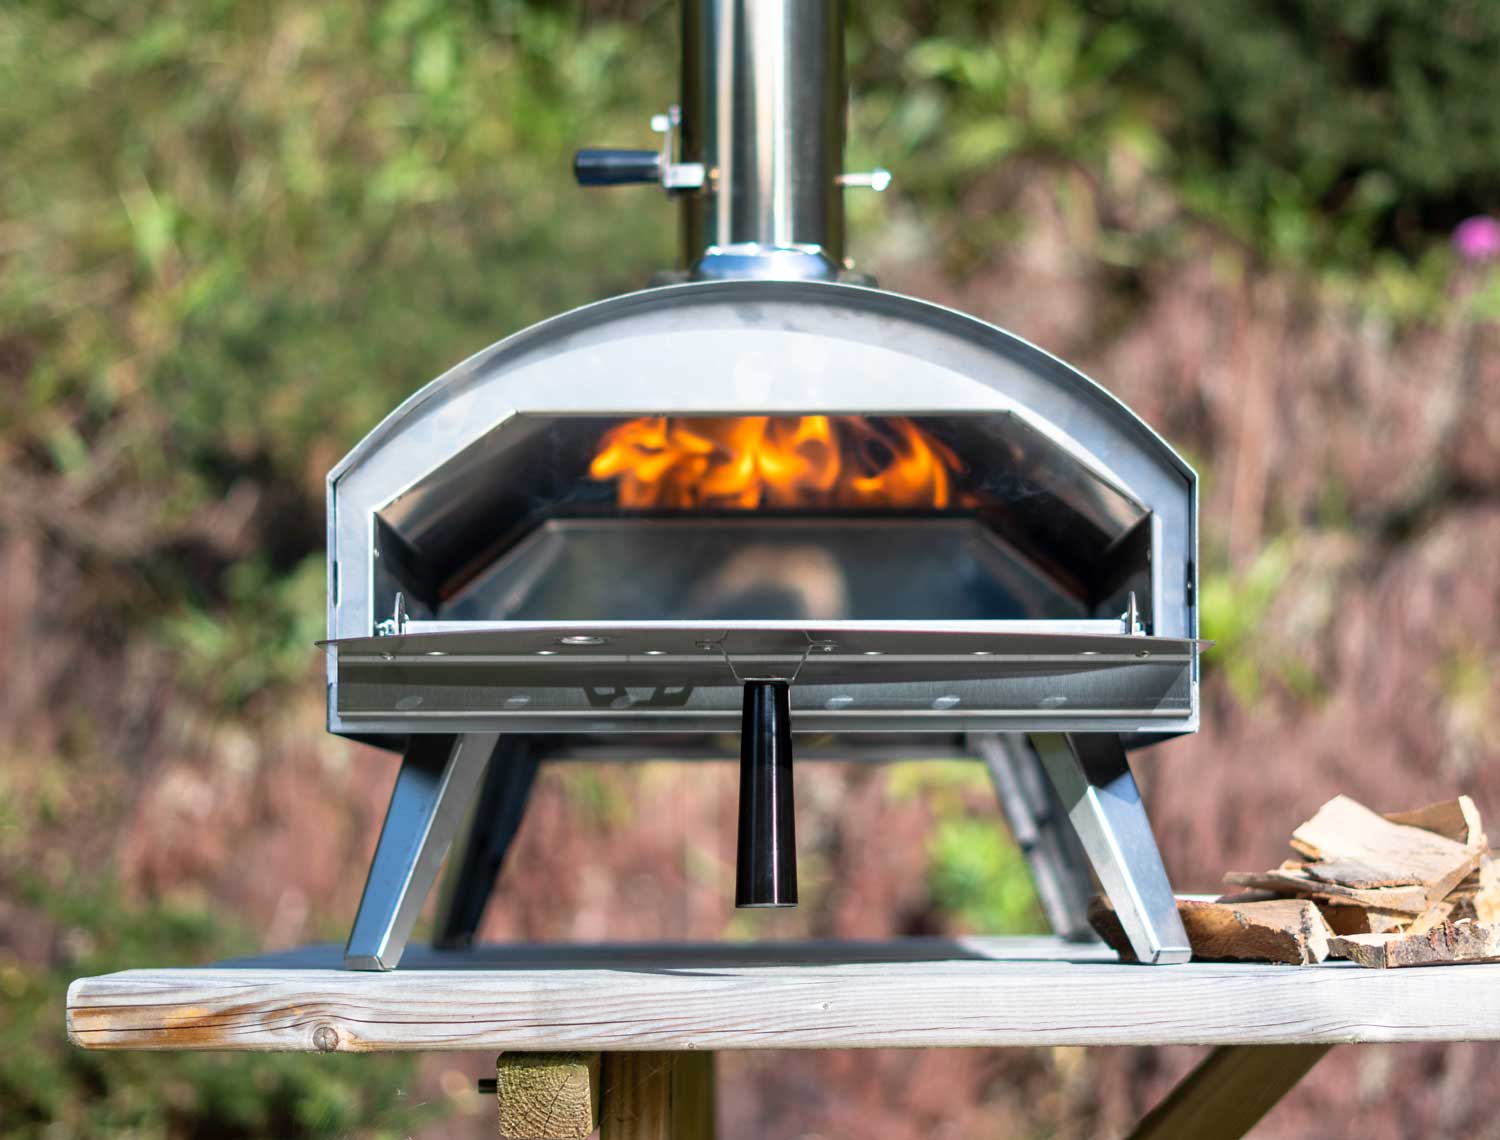 Front view of Venice wood fired pizza oven with the door open.  Fire from wood pellets is visible rising to the top during preheating